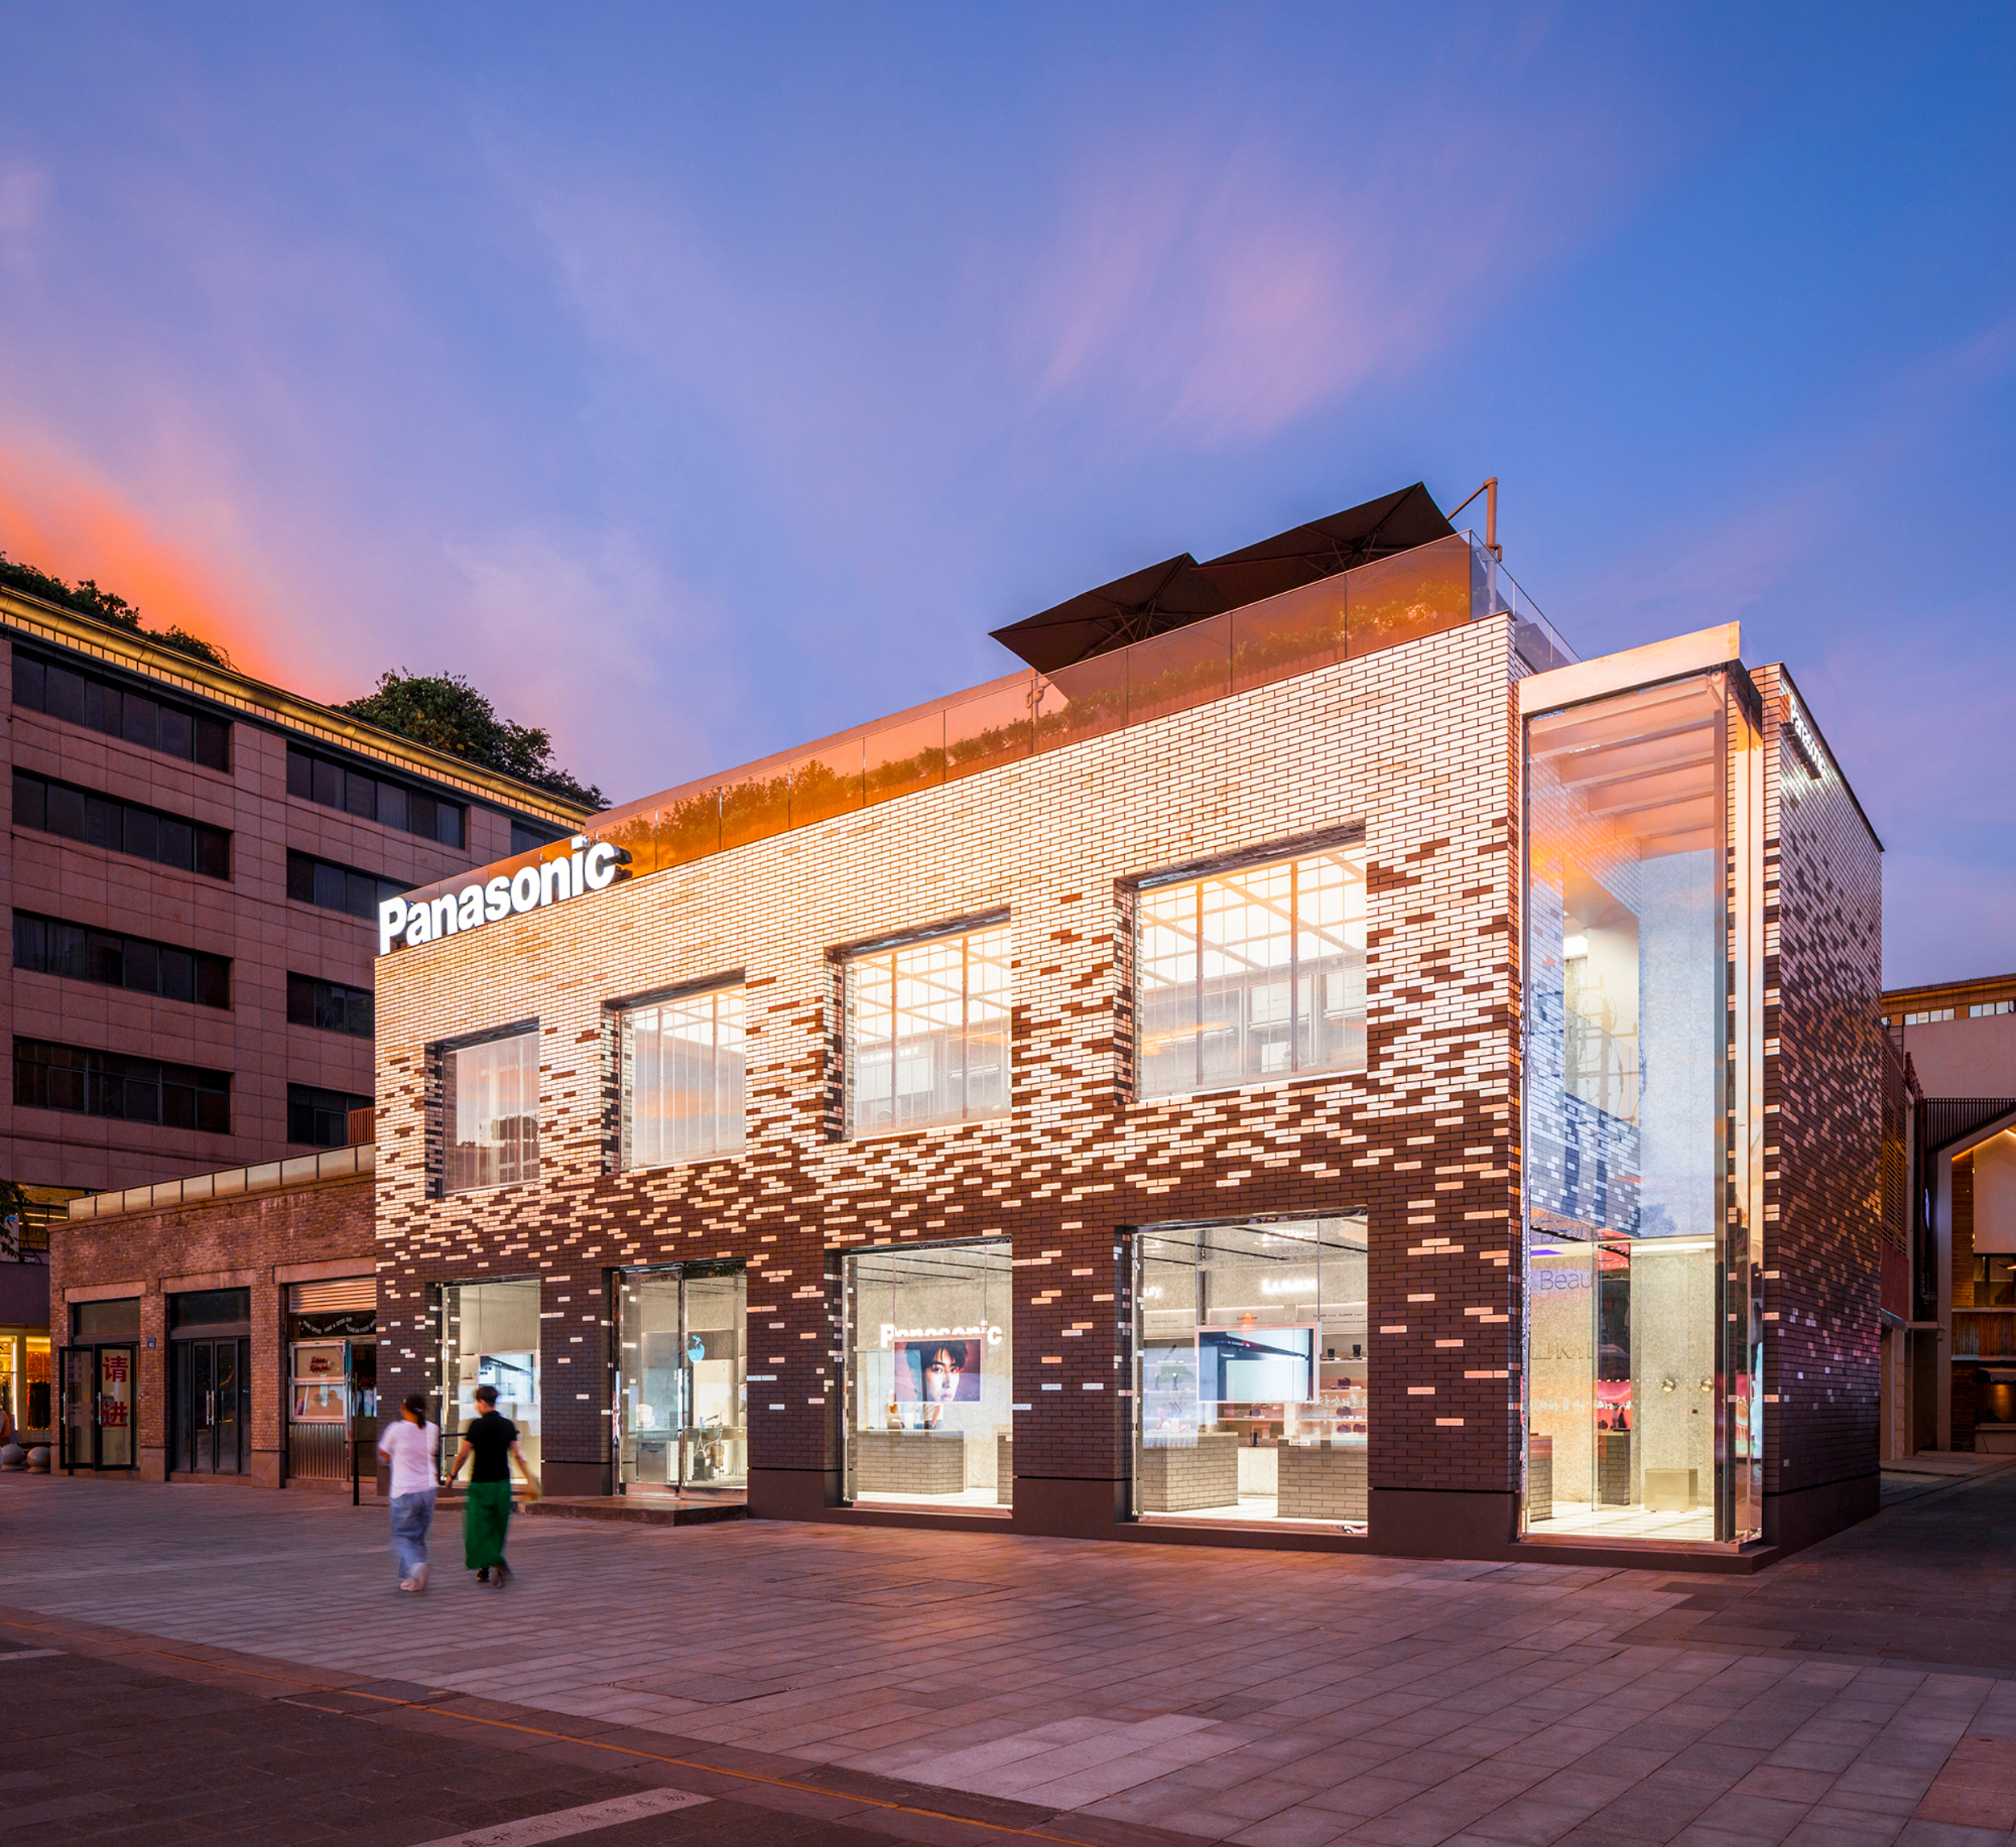 A two-story, glassed-in addition on one end of the building was created by Say Architects to add even greater visibility to the store’s interior.